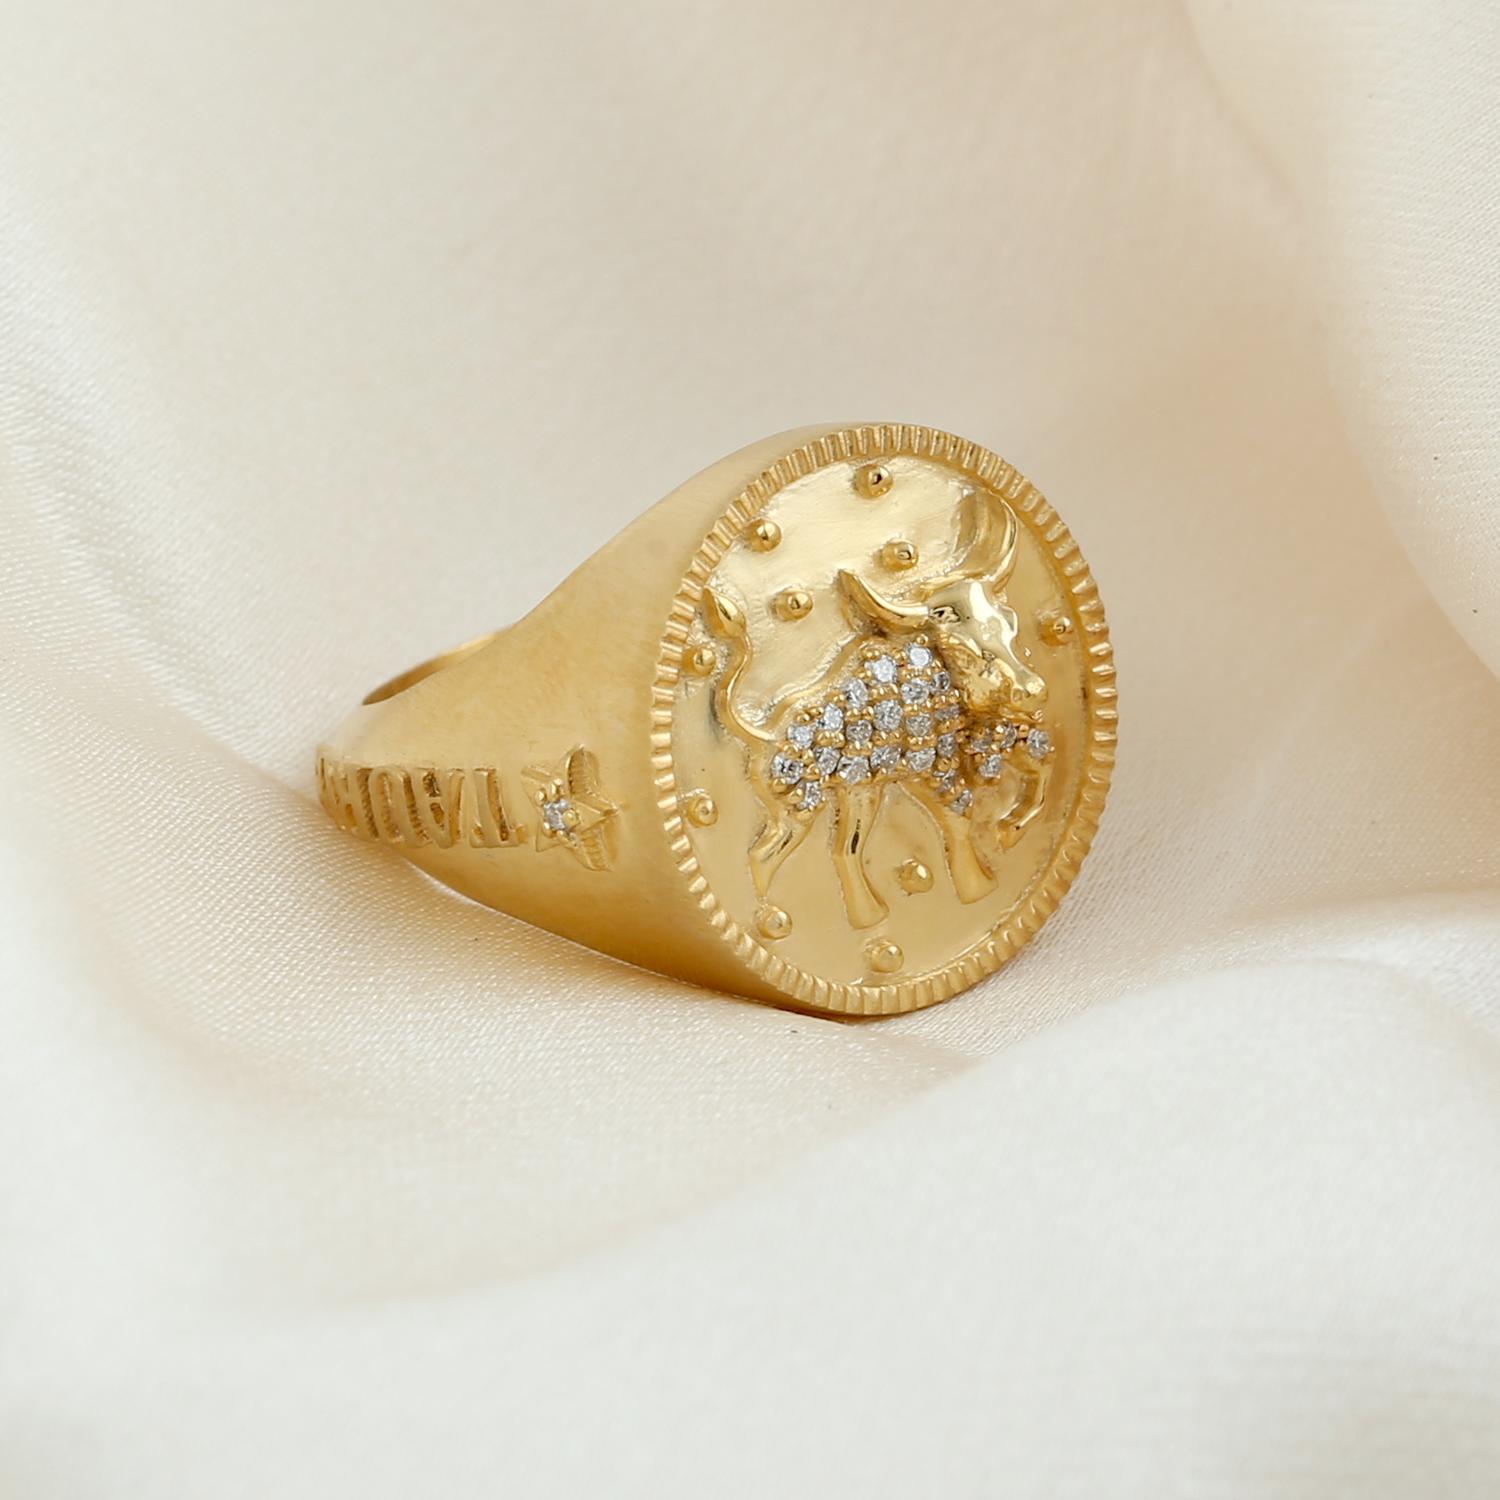 Art Nouveau Taurus Zodiac Ring With Pave Diamonds Made in 14k Yellow Gold For Sale